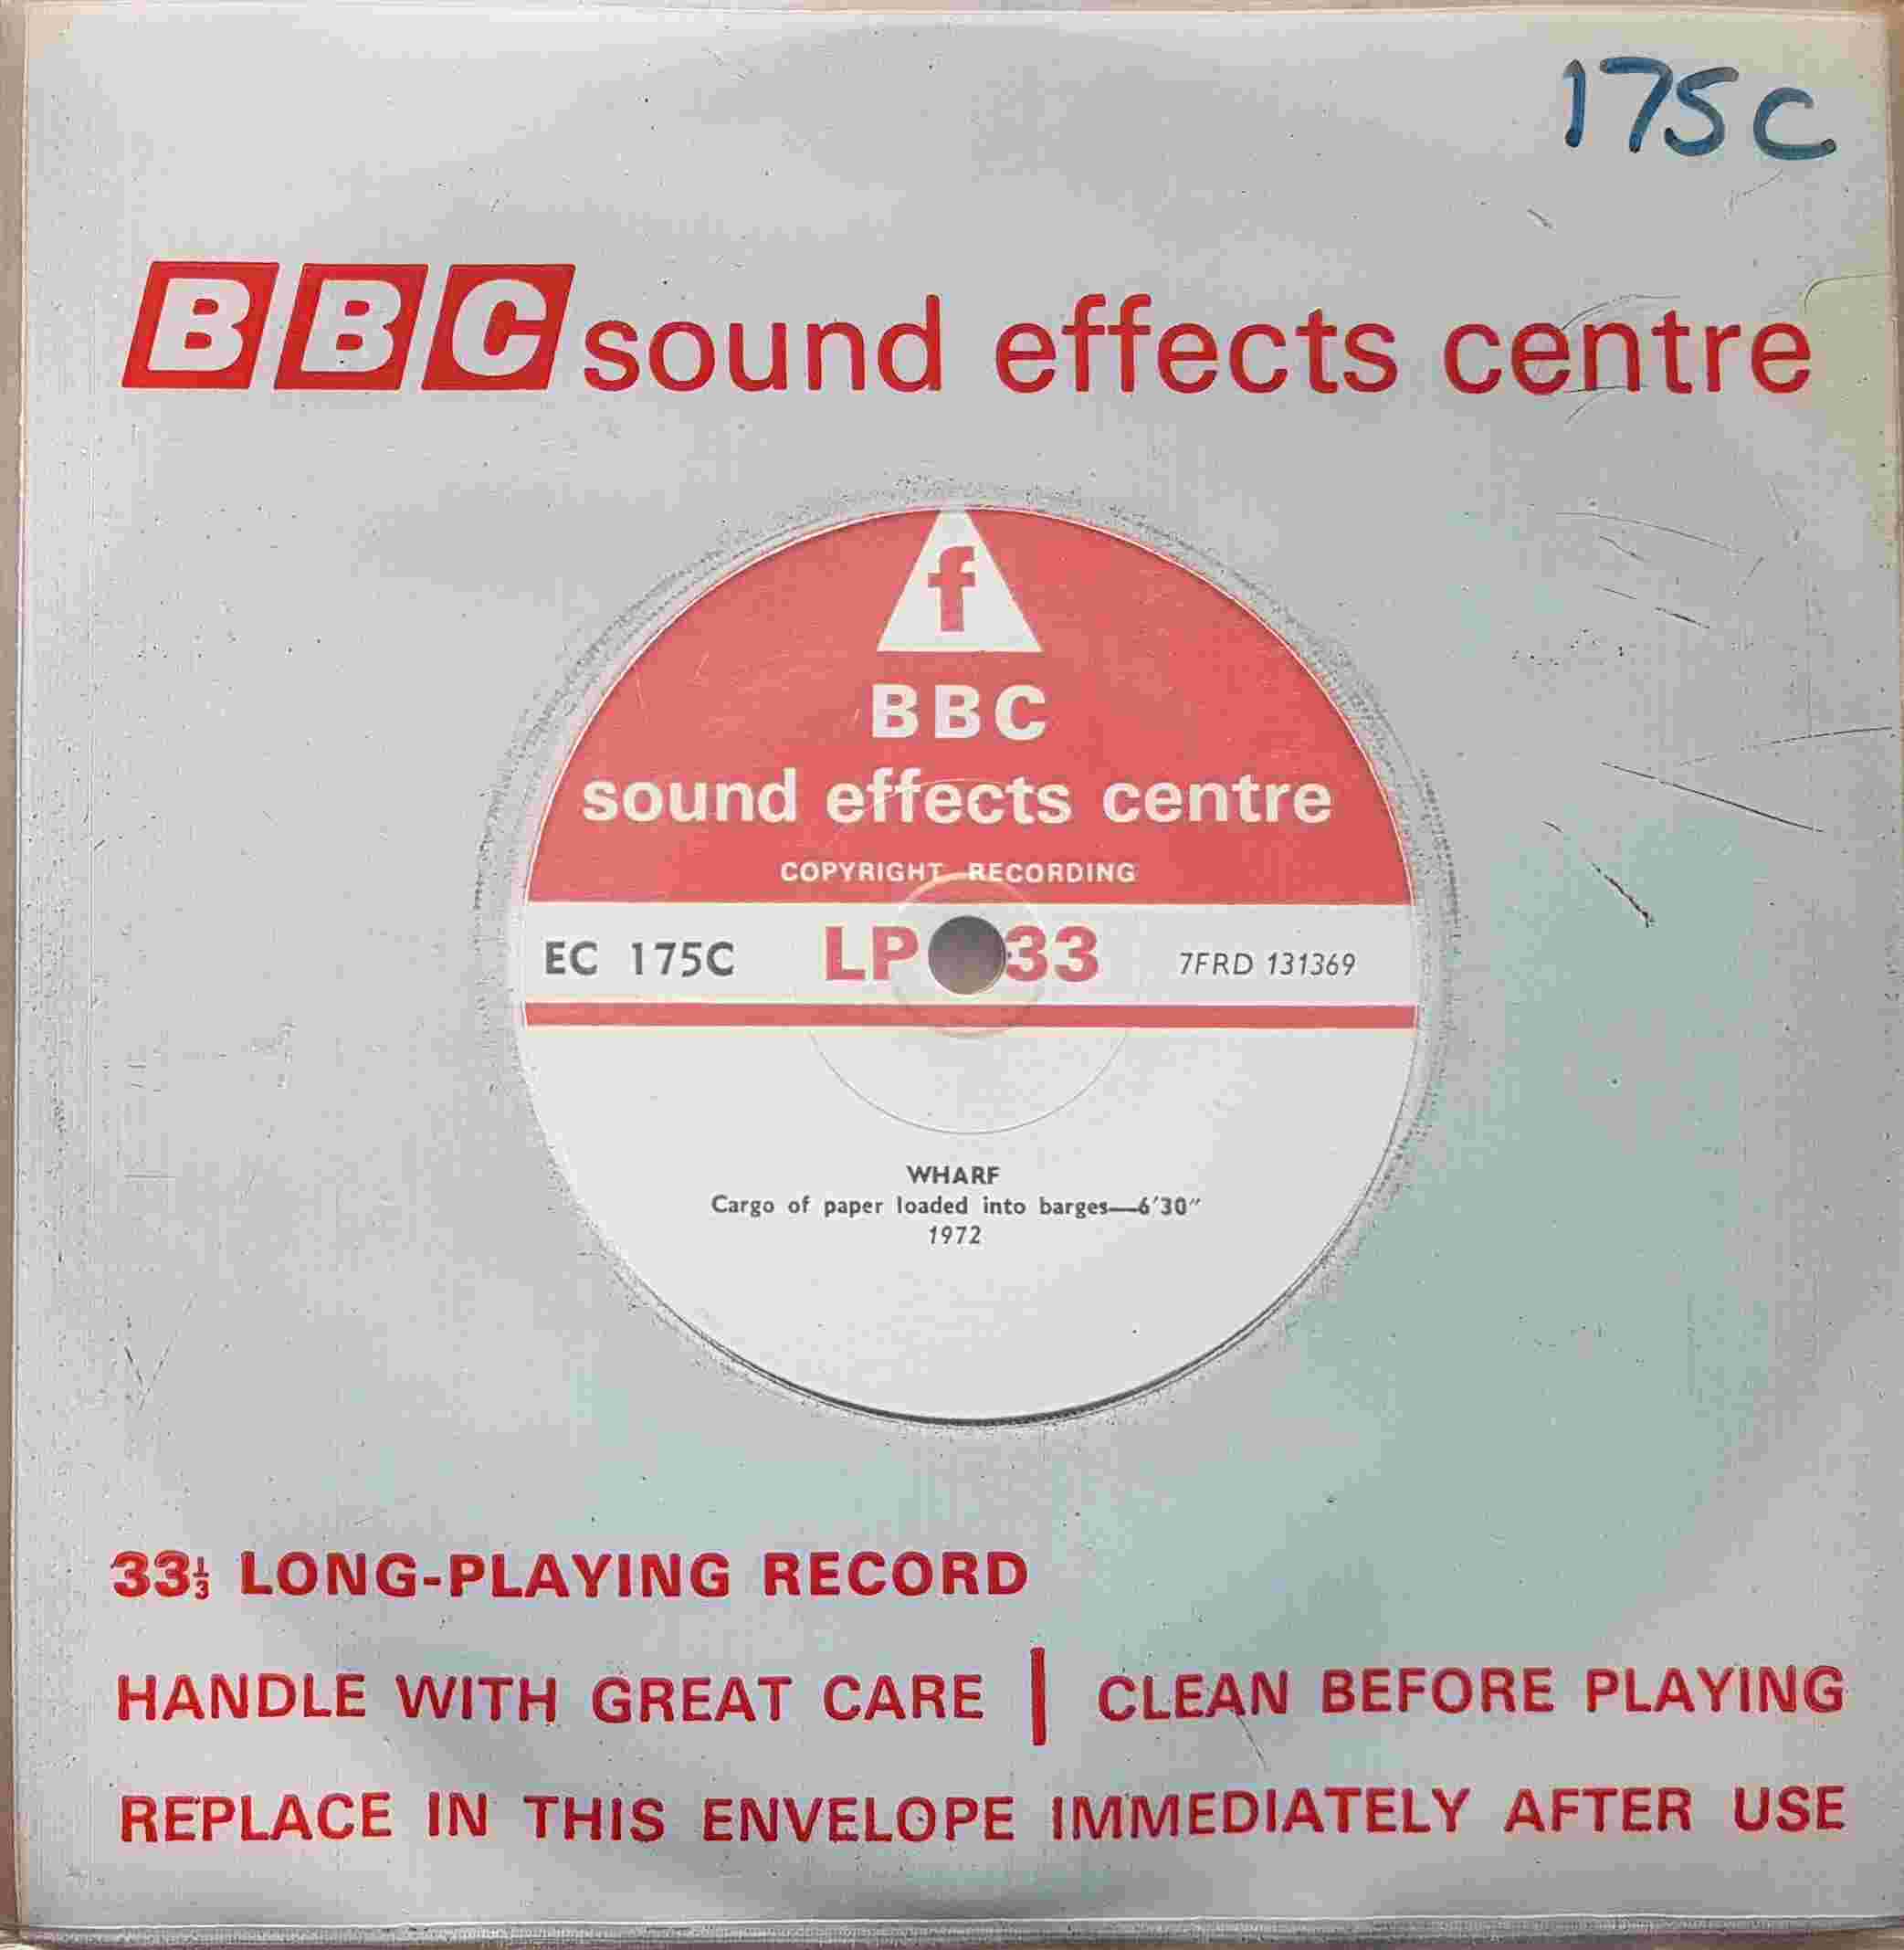 Picture of EC 175C Wharf by artist Not registered from the BBC singles - Records and Tapes library